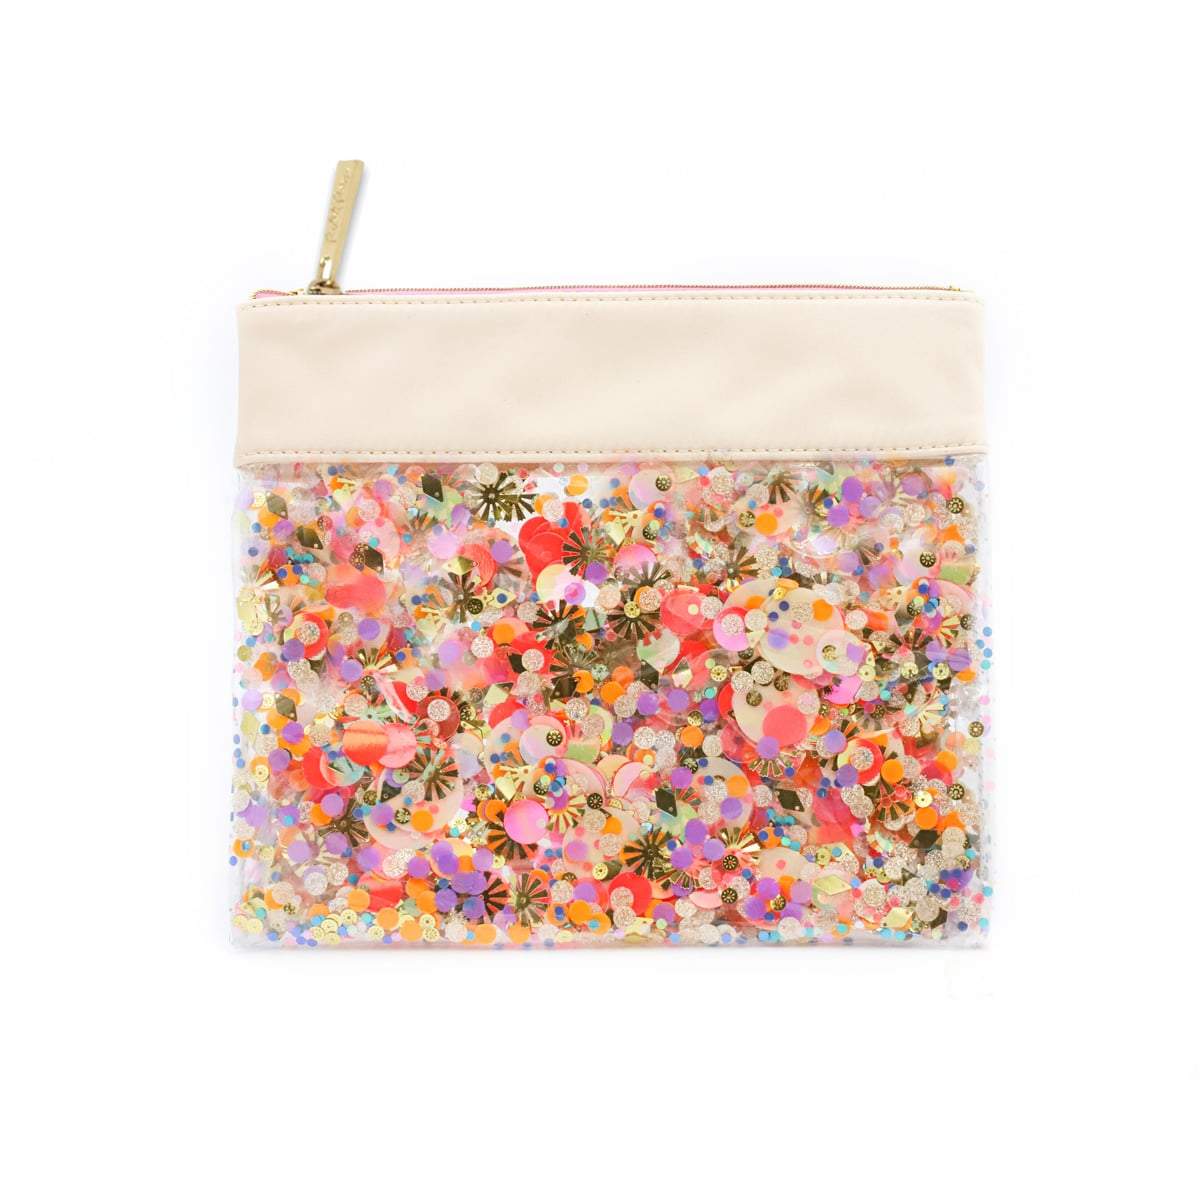 Shop Packed Party Bread N Butter Everything Pouch Bag - Premium Clutch Bag from Packed Party Online now at Spoiled Brat 